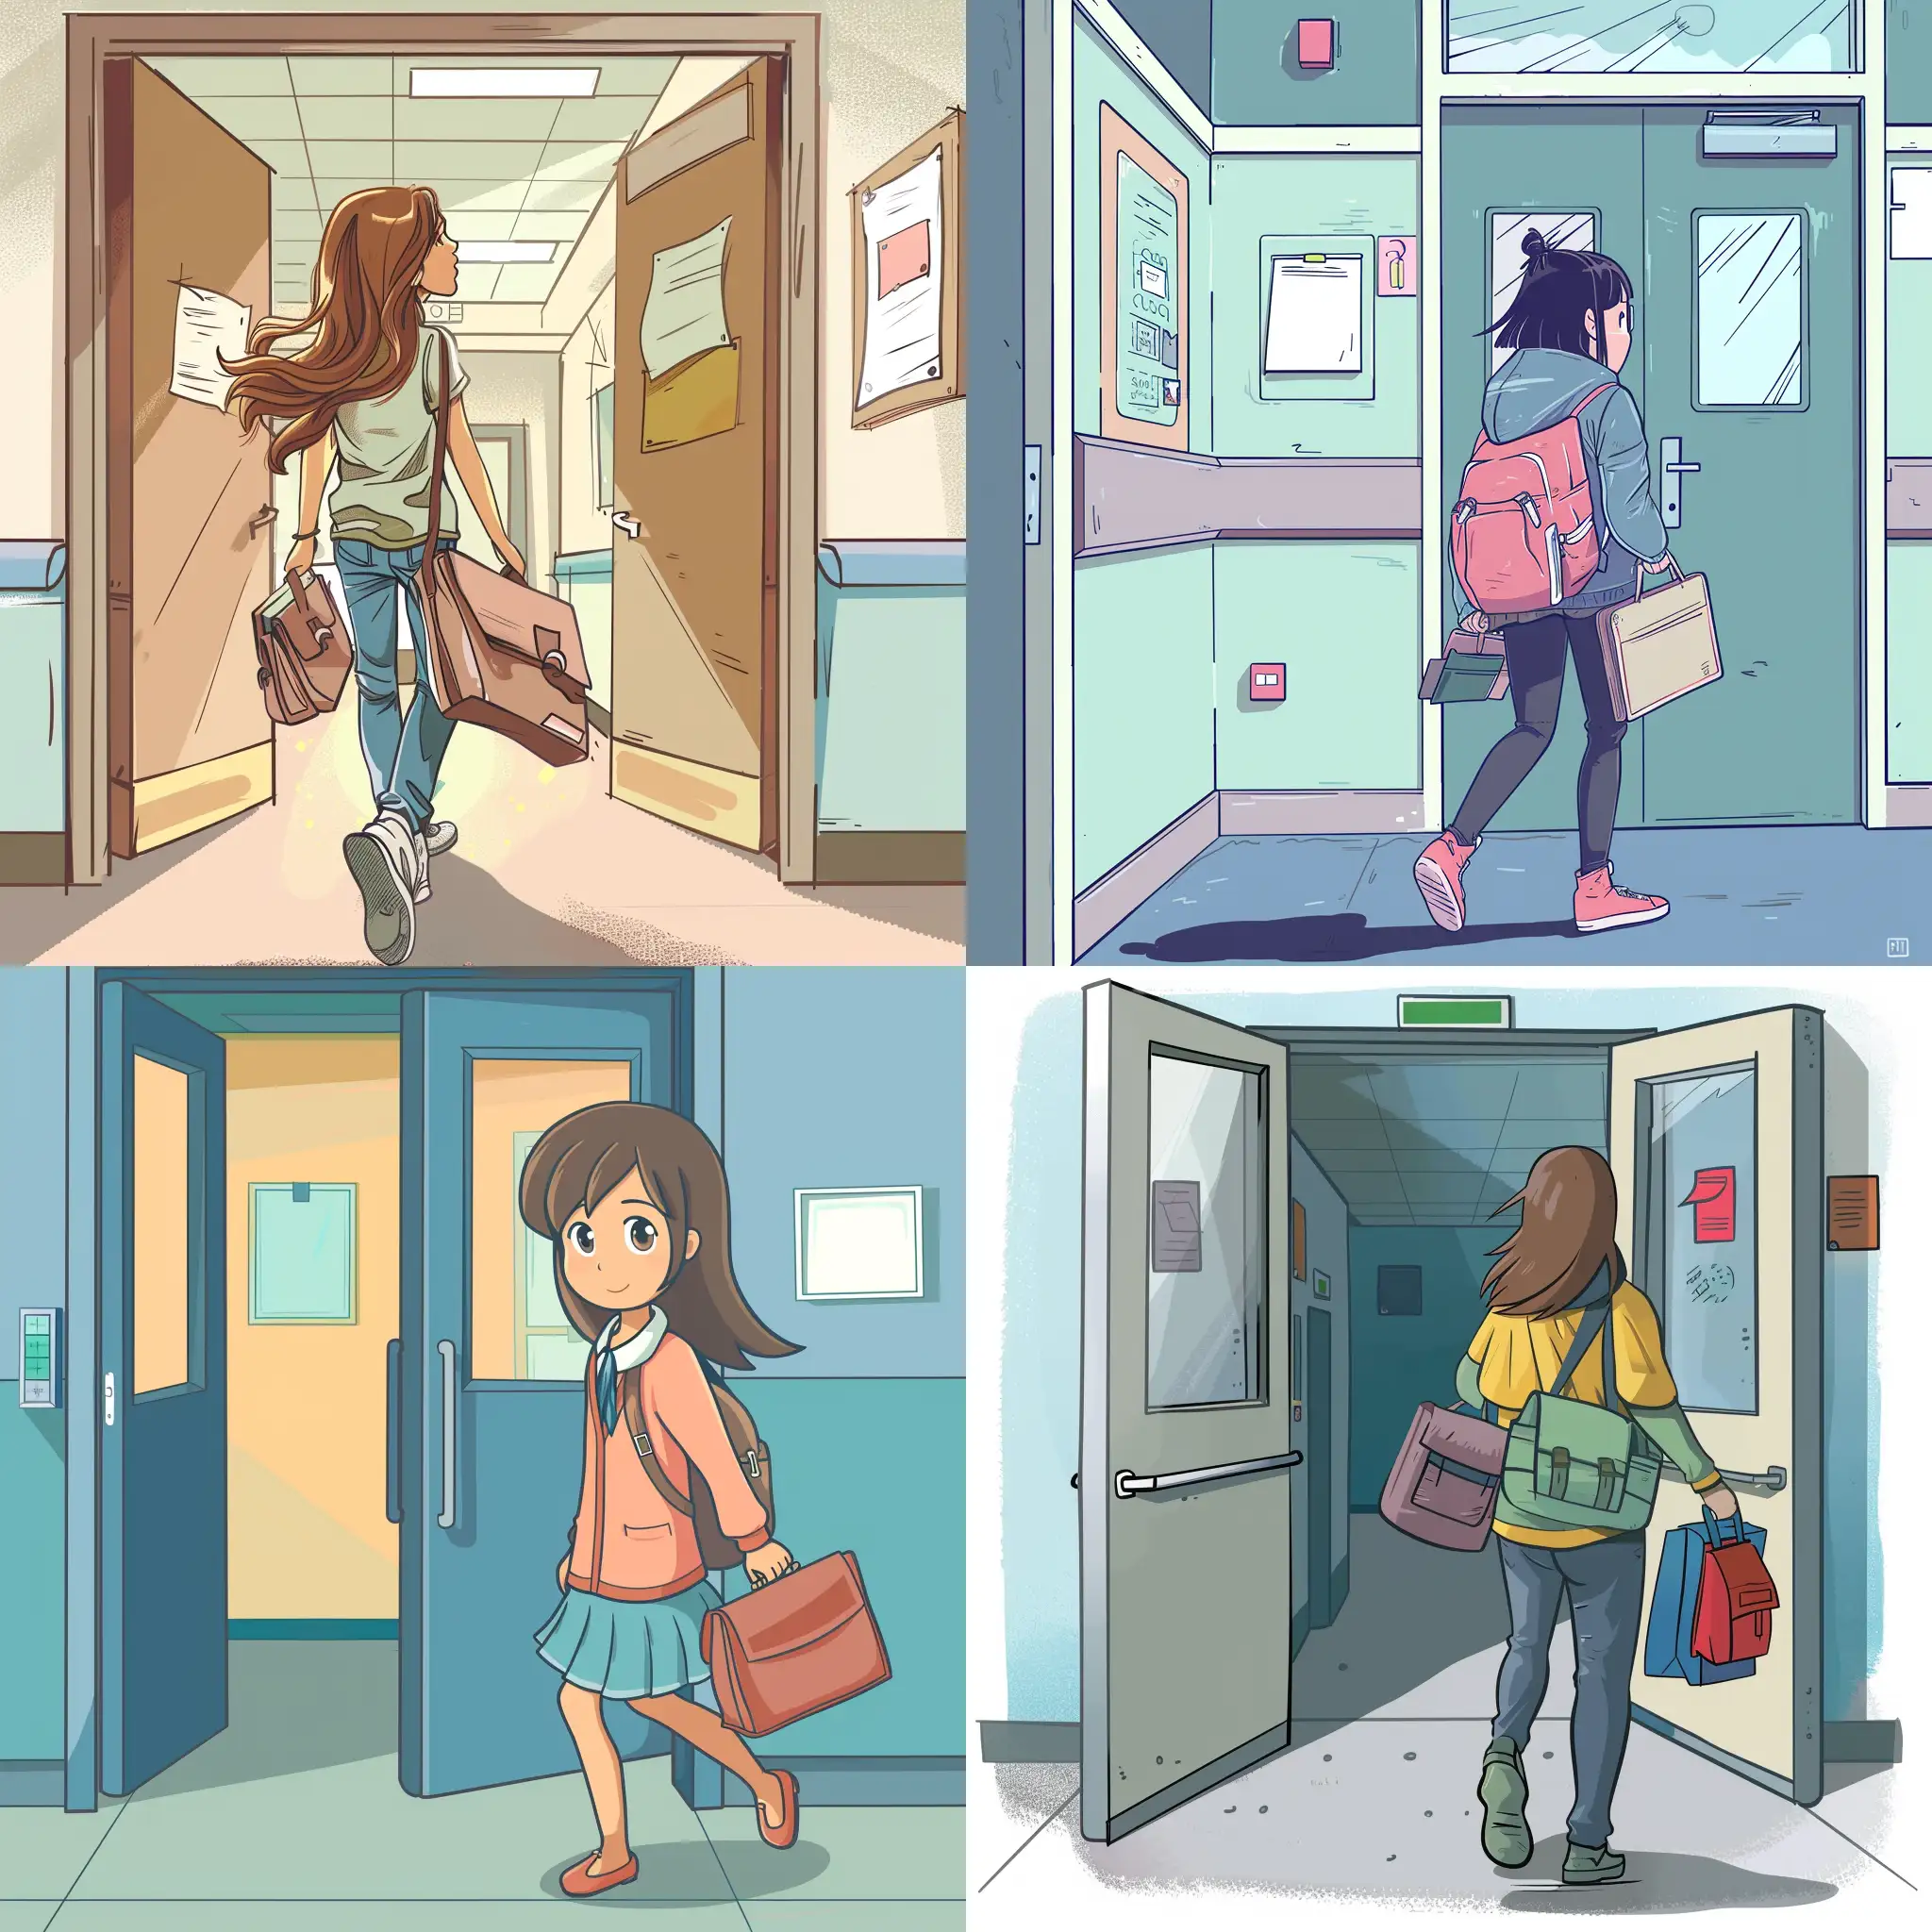 cartoon style, a girl is leaving classroom, she is not carrying bags and books.